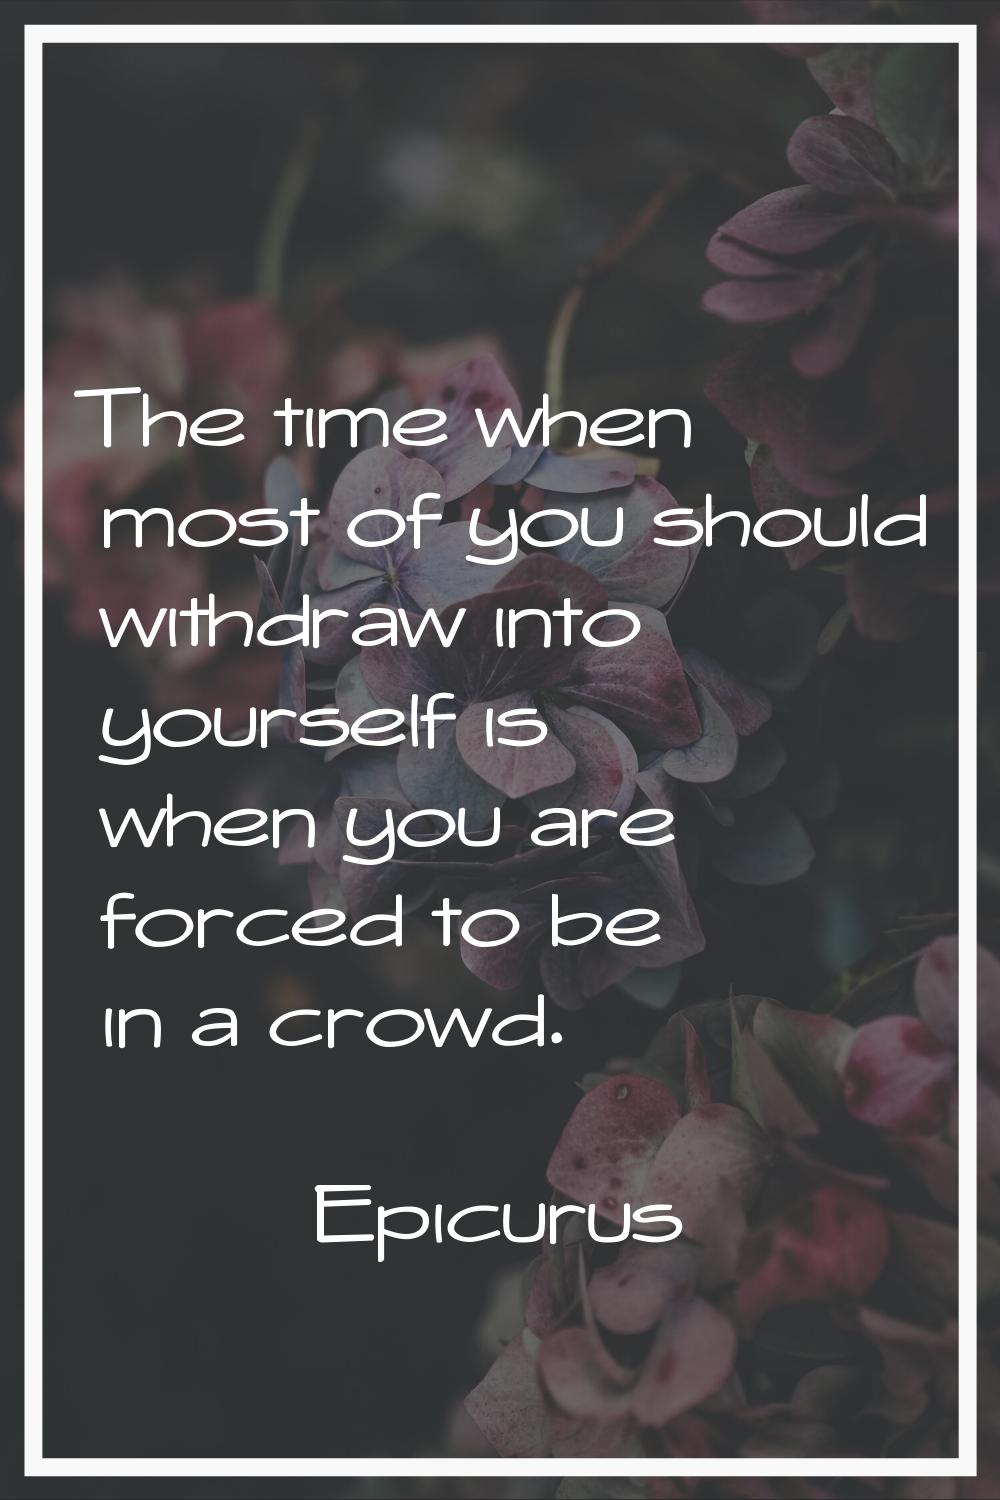 The time when most of you should withdraw into yourself is when you are forced to be in a crowd.